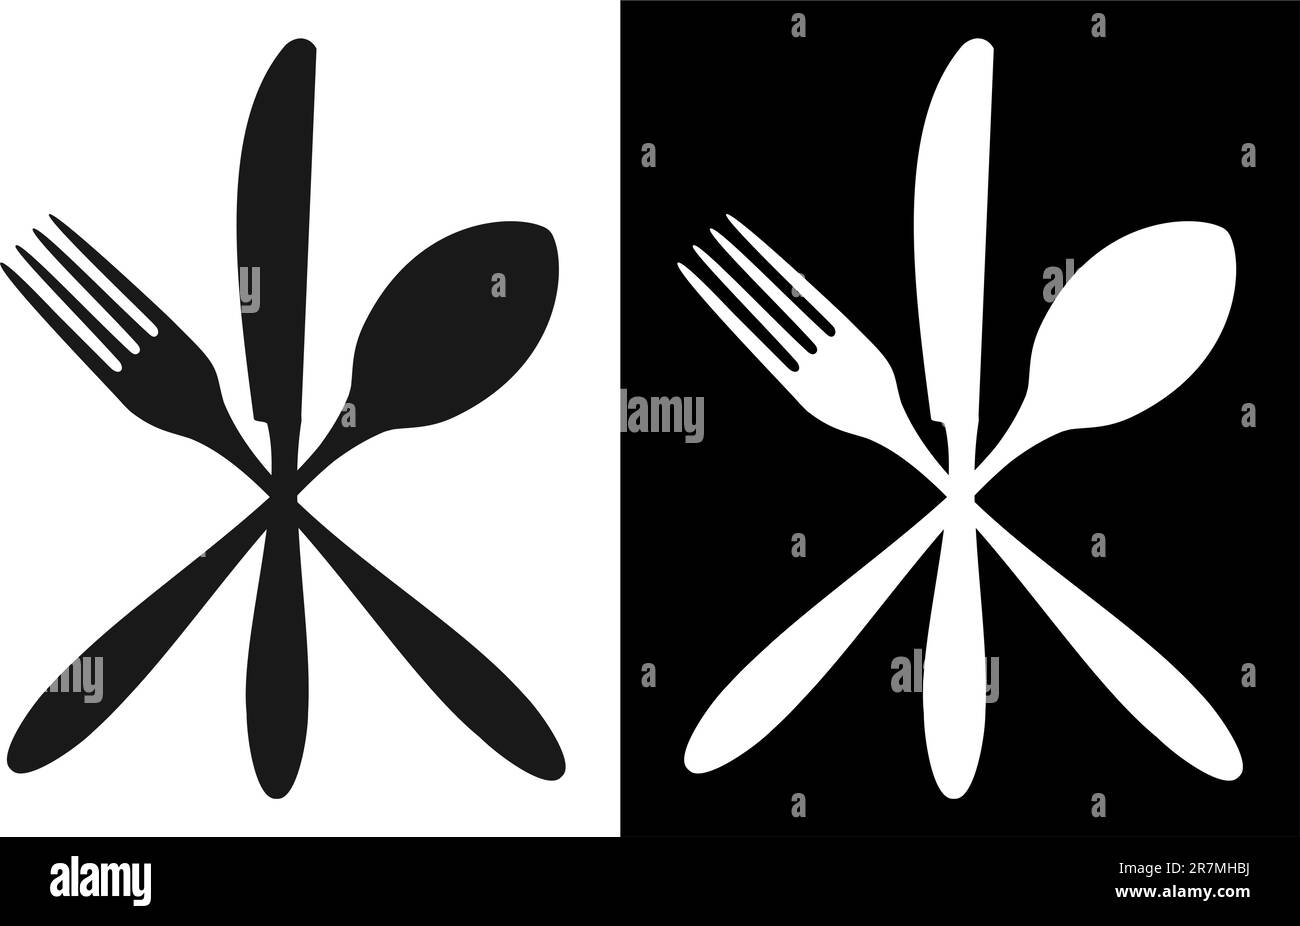 Cutlery icons. Fork, knife and spoon silhouettes on black and white backgrounds. Vector available. Stock Vector